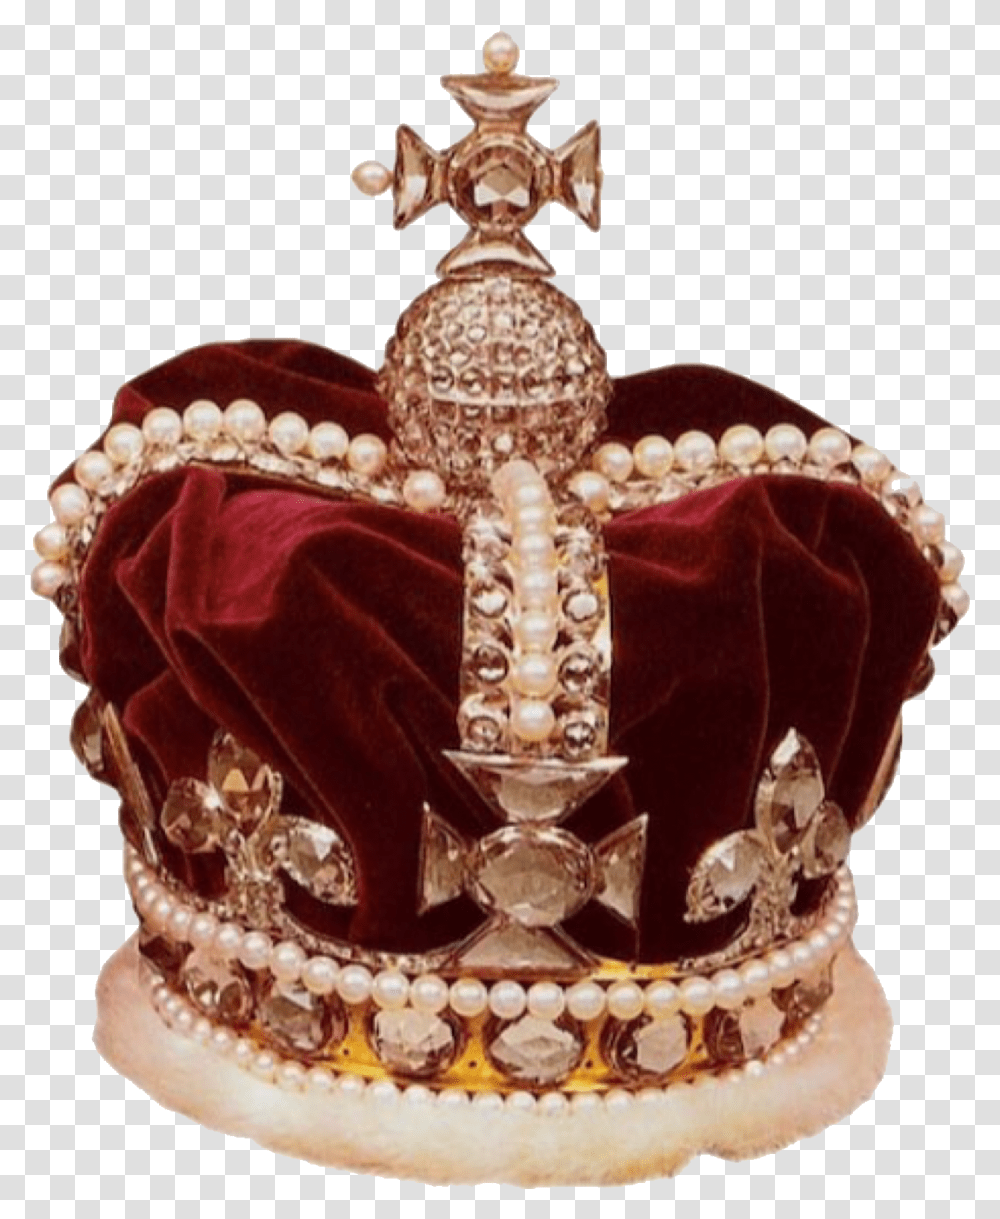 Pngtumblr Pngs Crown Redvelvet Red Gold Goldencrown Tiara, Jewelry, Accessories, Accessory, Birthday Cake Transparent Png